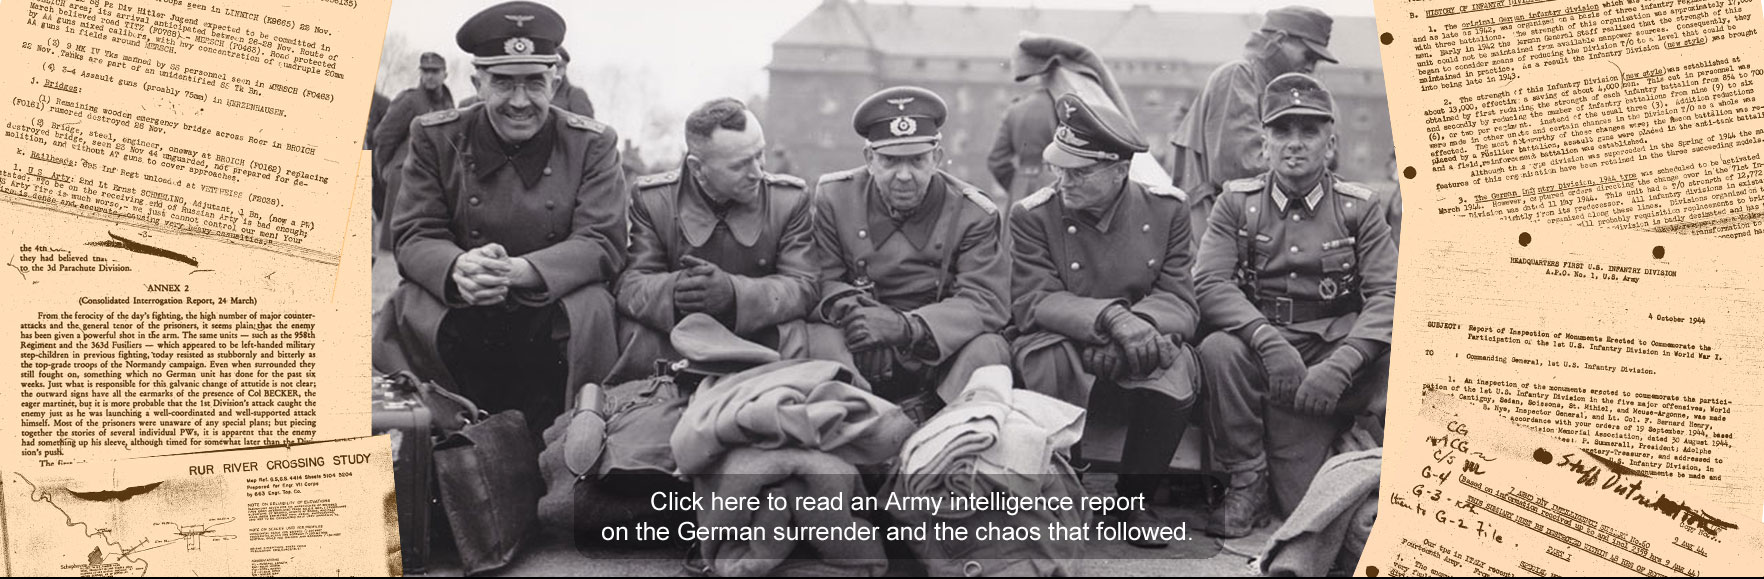 Captured German officers, among the thousands who rushed to surrender to the Americans and avoid the Soviets in the last weeks of the war. Photo courtesy of the George C. Marshall Foundation.